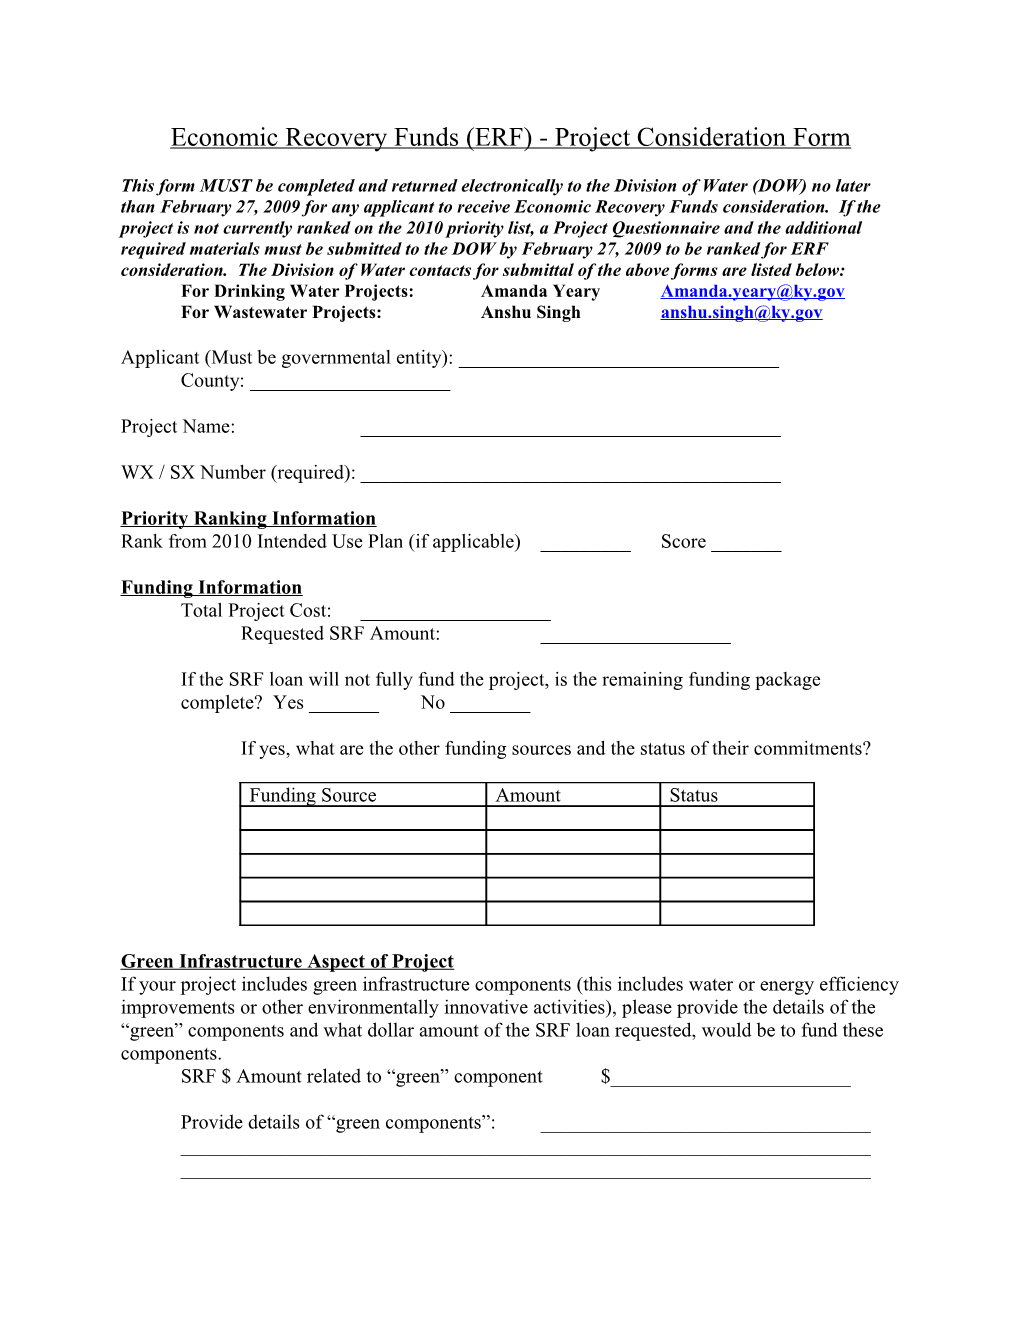 Economic Recovery Funds - Project Consideration Form